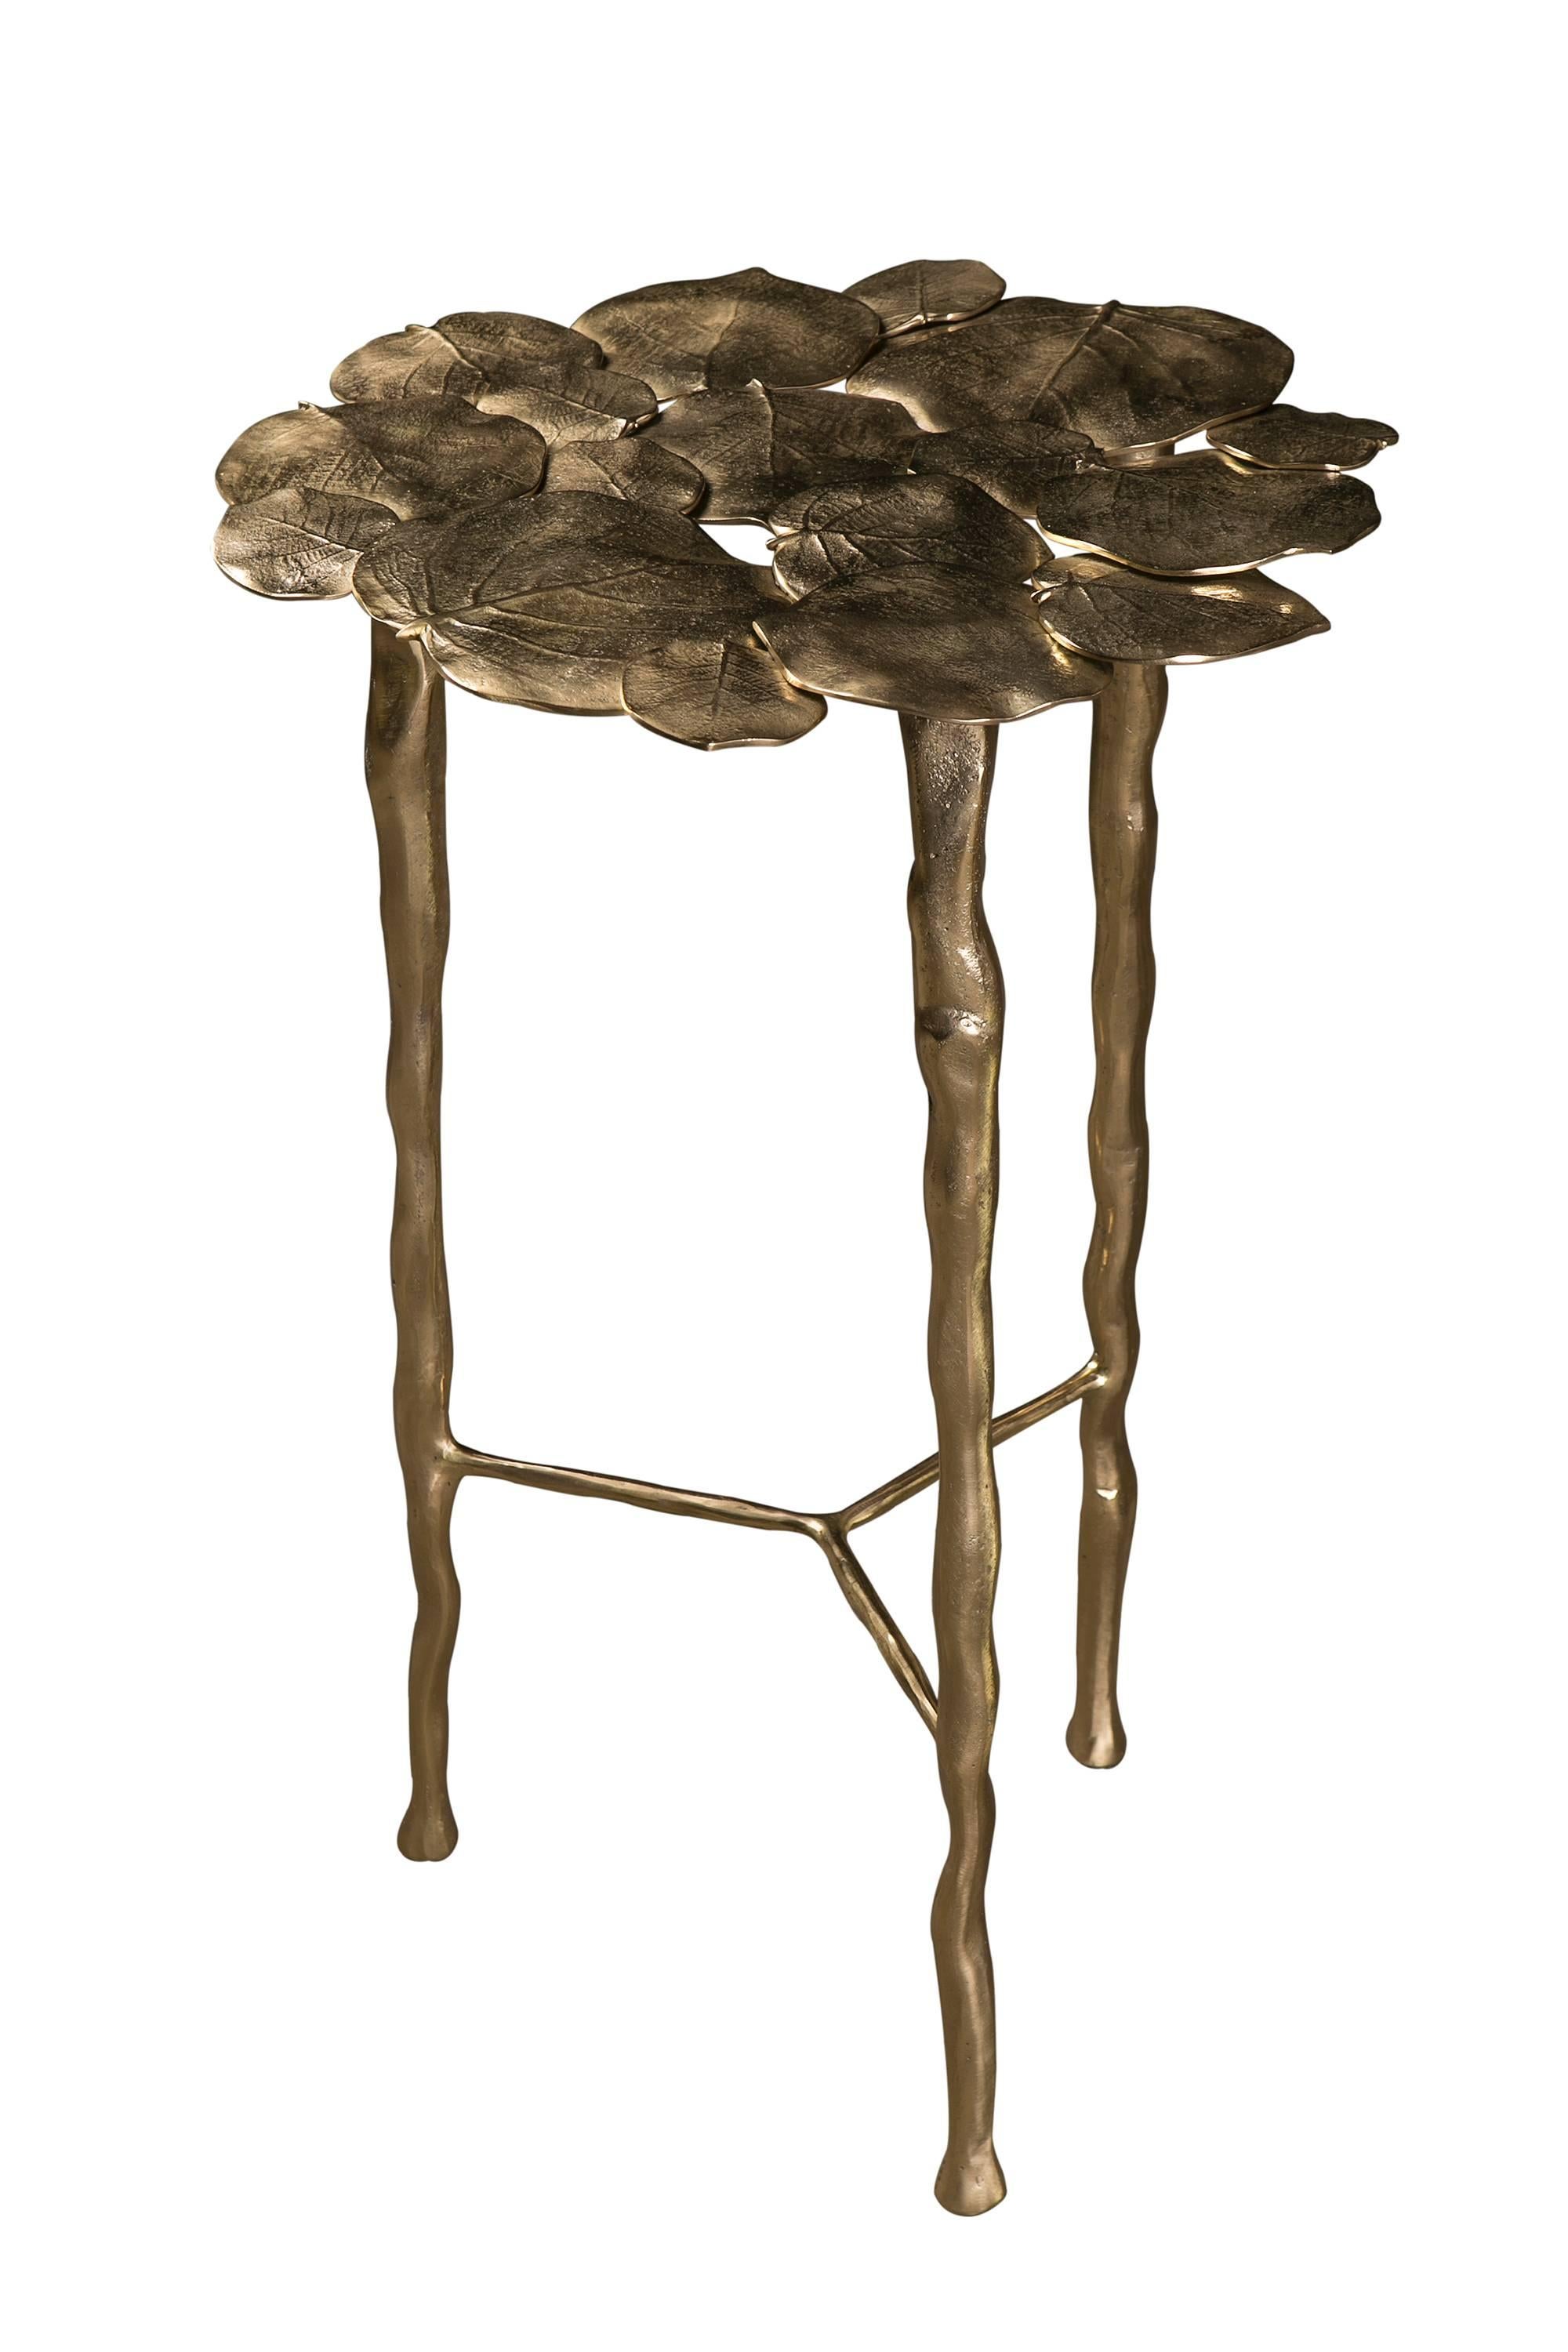 A beautiful decorative side table composed of individually moulded cast brass leaves with brass legs.